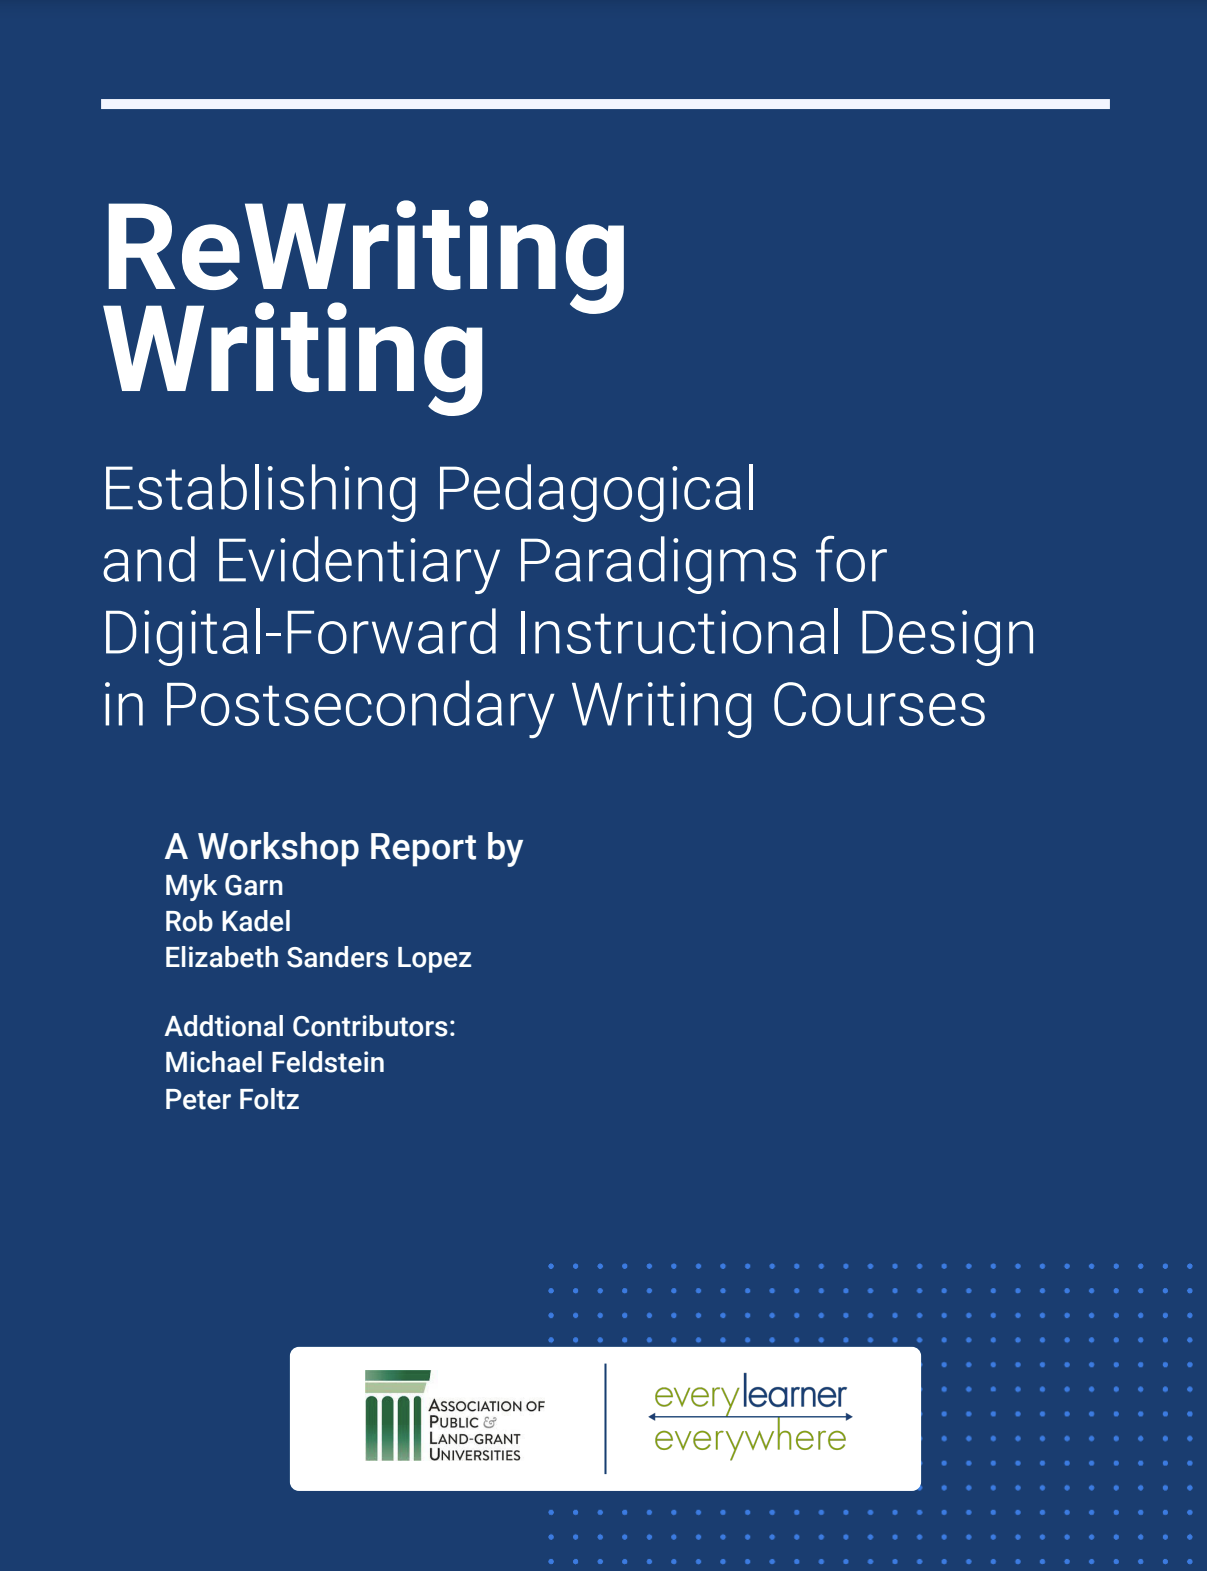 Re-Writing Writing Report Cover